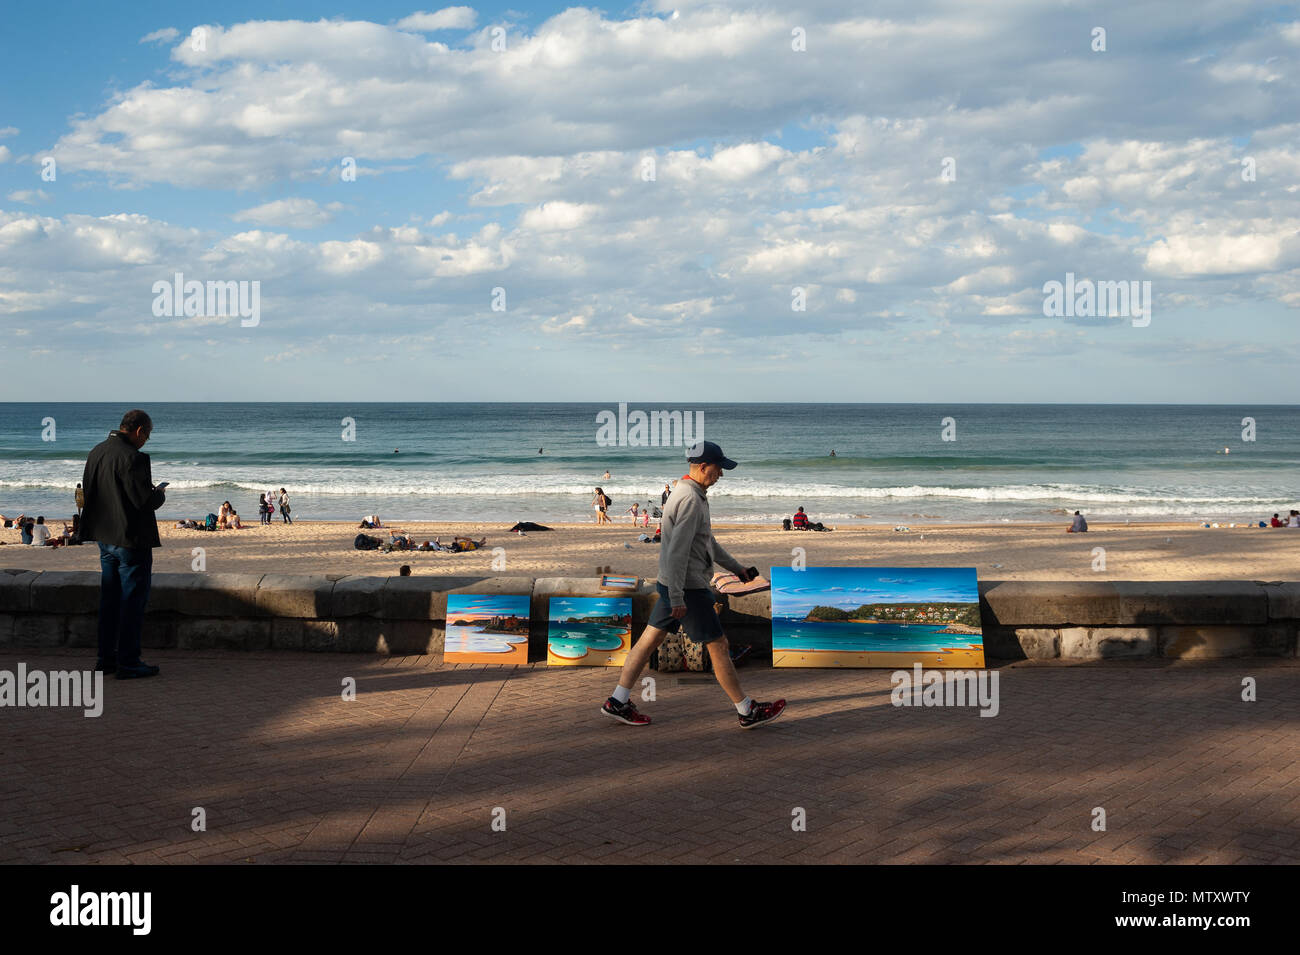 10.05.2018, Sydney, New South Wales, Australia - A man walks down the boardwalk along Manly Beach as surfers and sunbathers are seen in the backdrop. Stock Photo